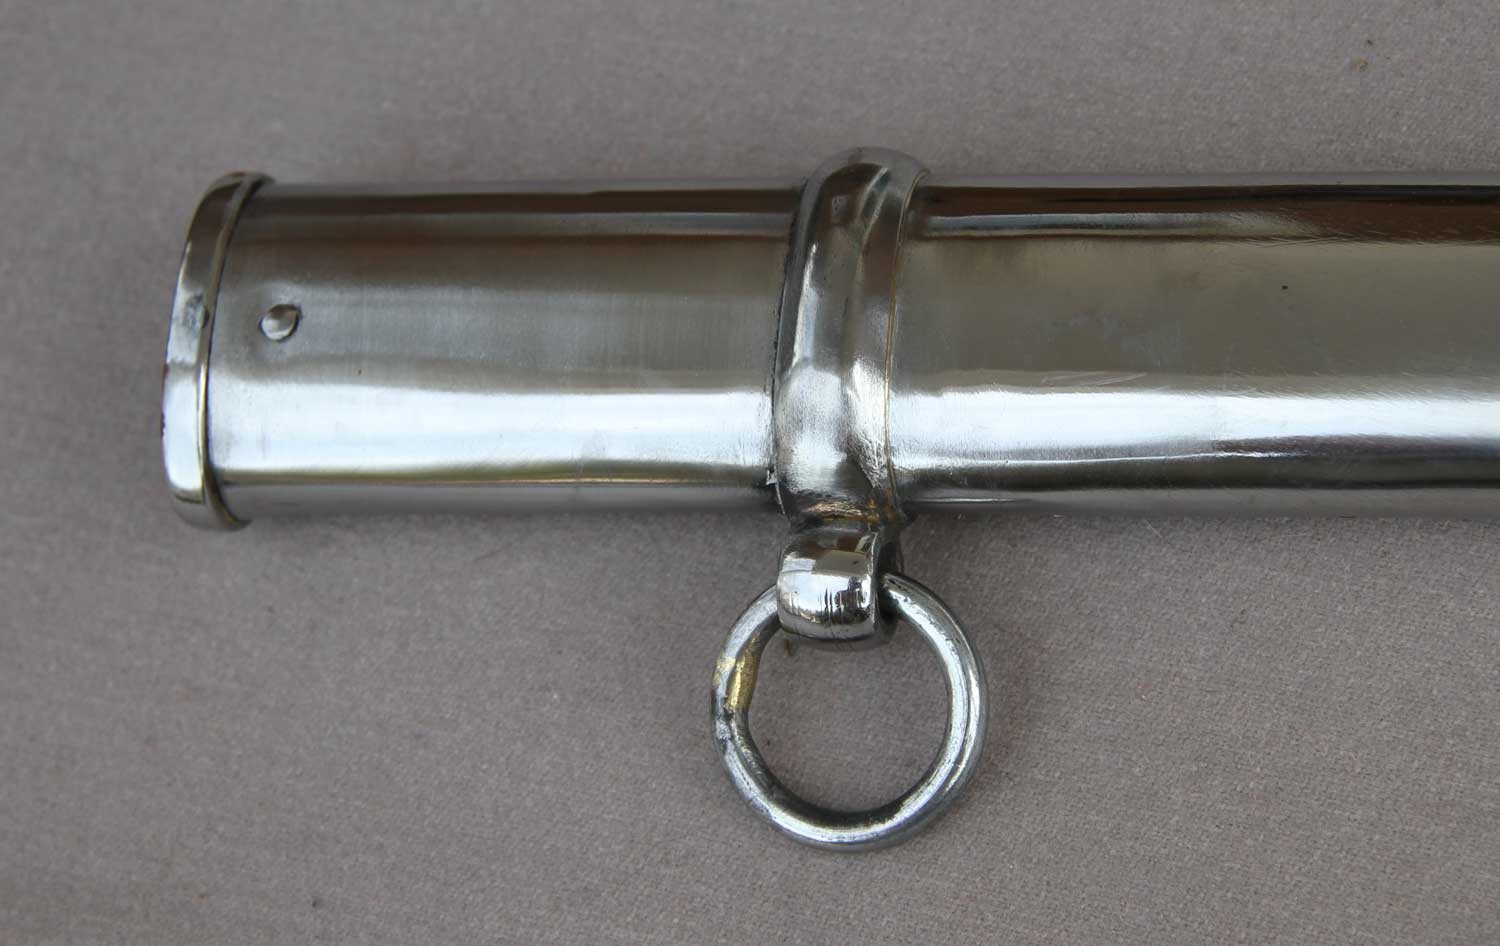 French, Light Cavalry Sabre - Click Image to Close